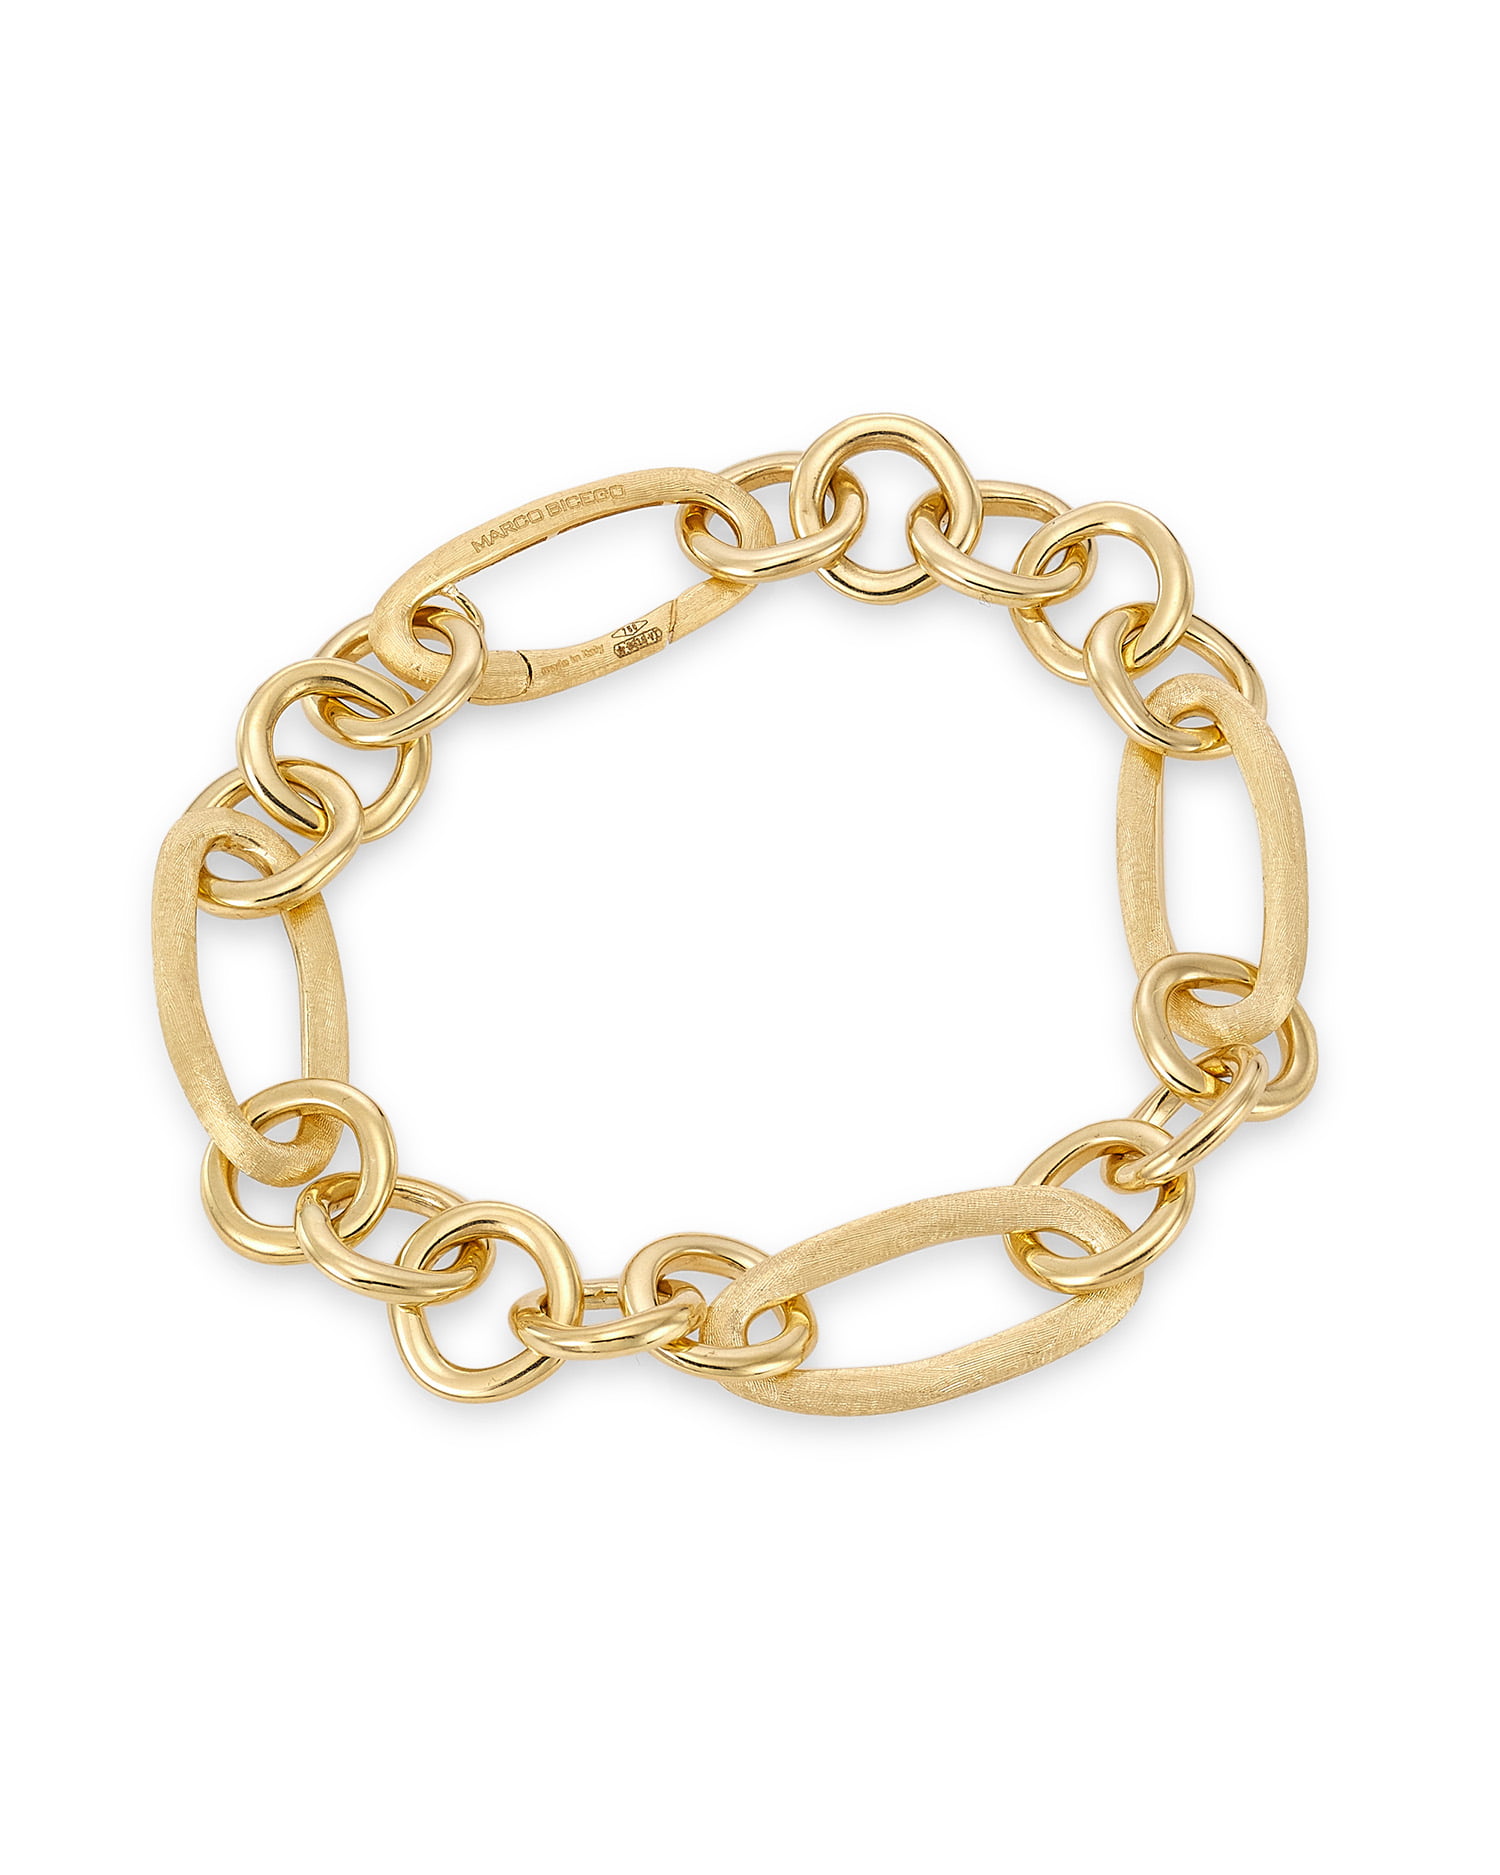 Marco Bicego Jaipur 18K Yellow Gold Mixed-Link Chain Bracelet